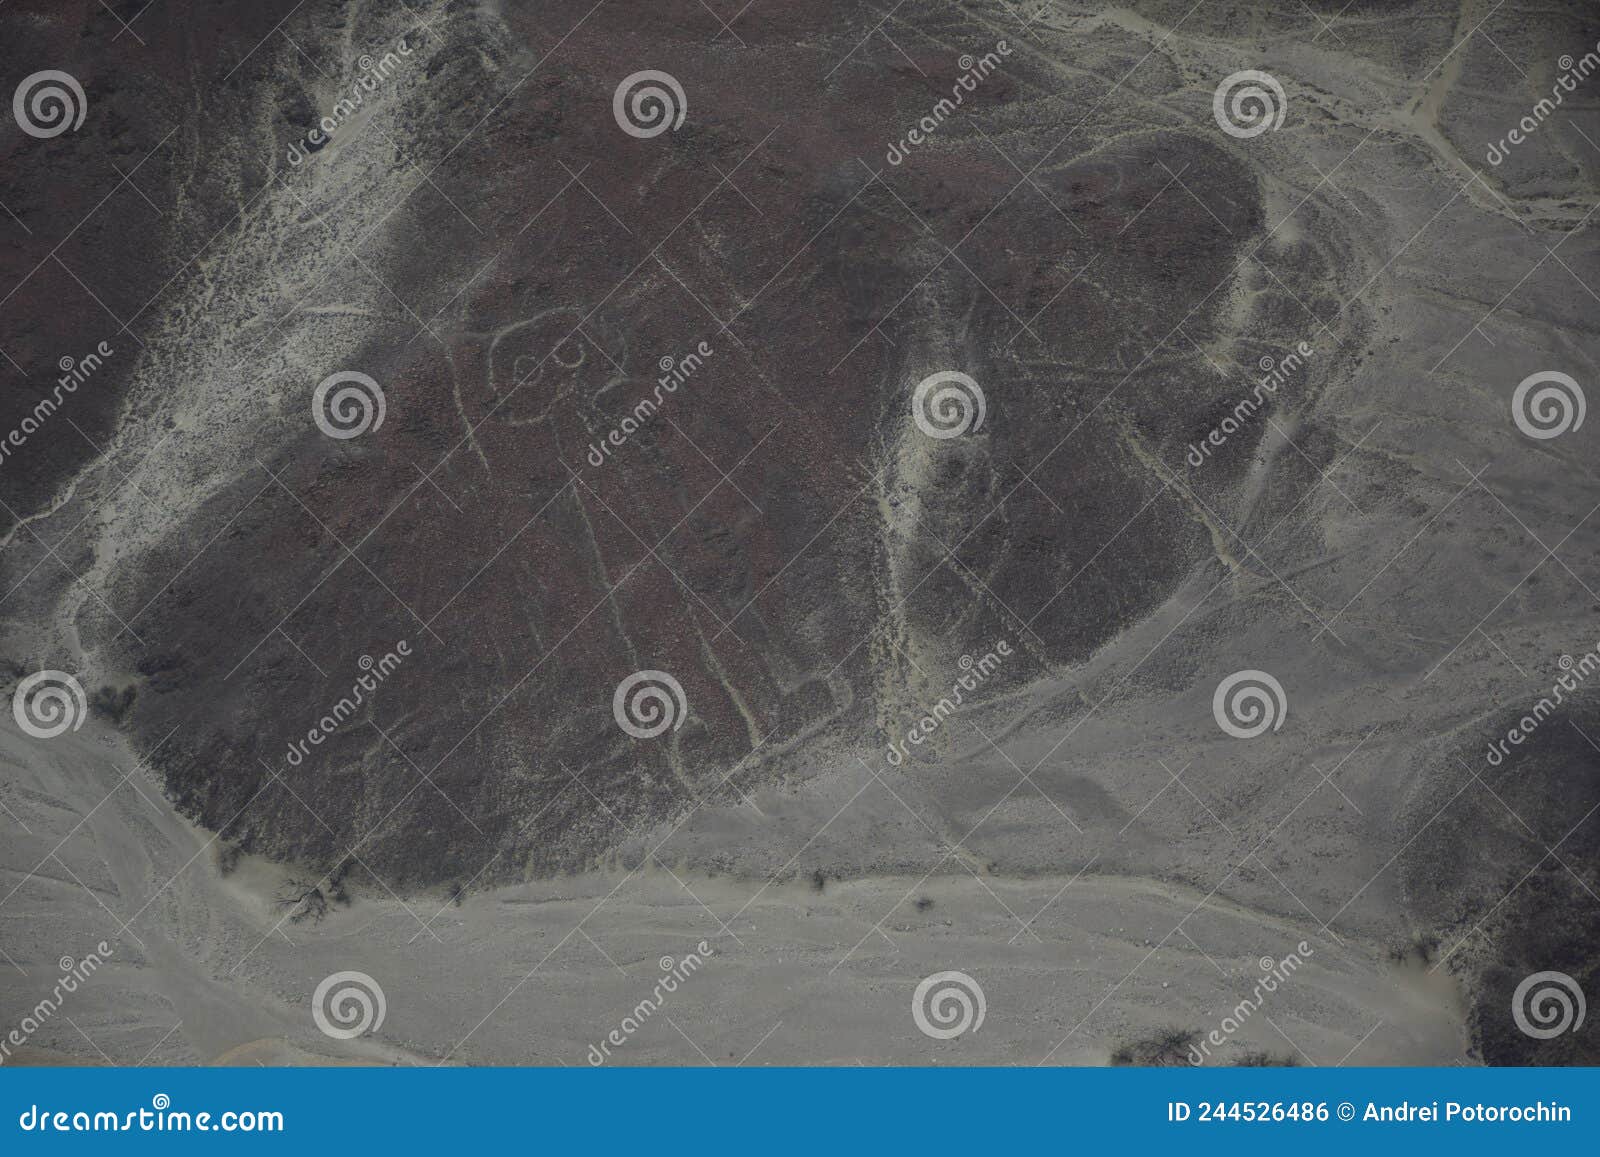 nazca line of the astronaut . ancient geoglyph located in the nazca desert in southern peru